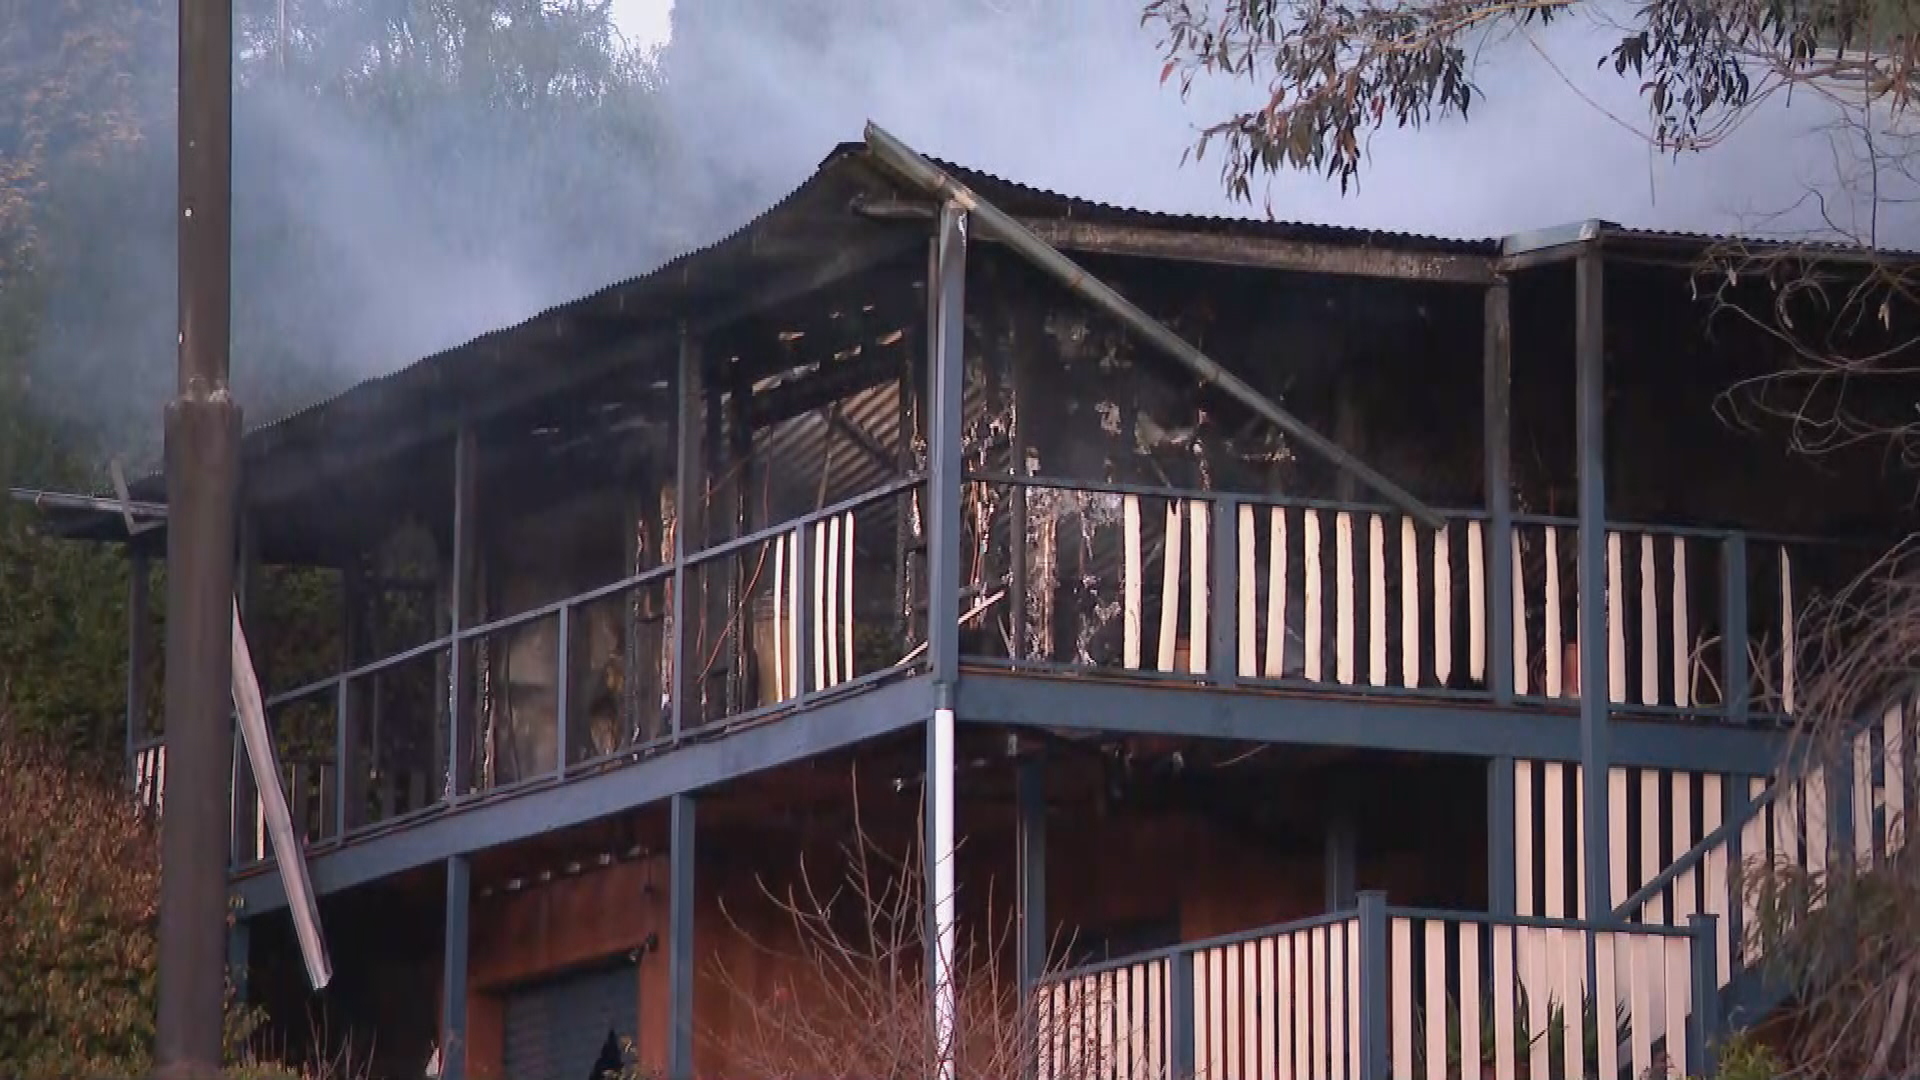 The Katoomba home was engulfed by flames when fire crews arrived.